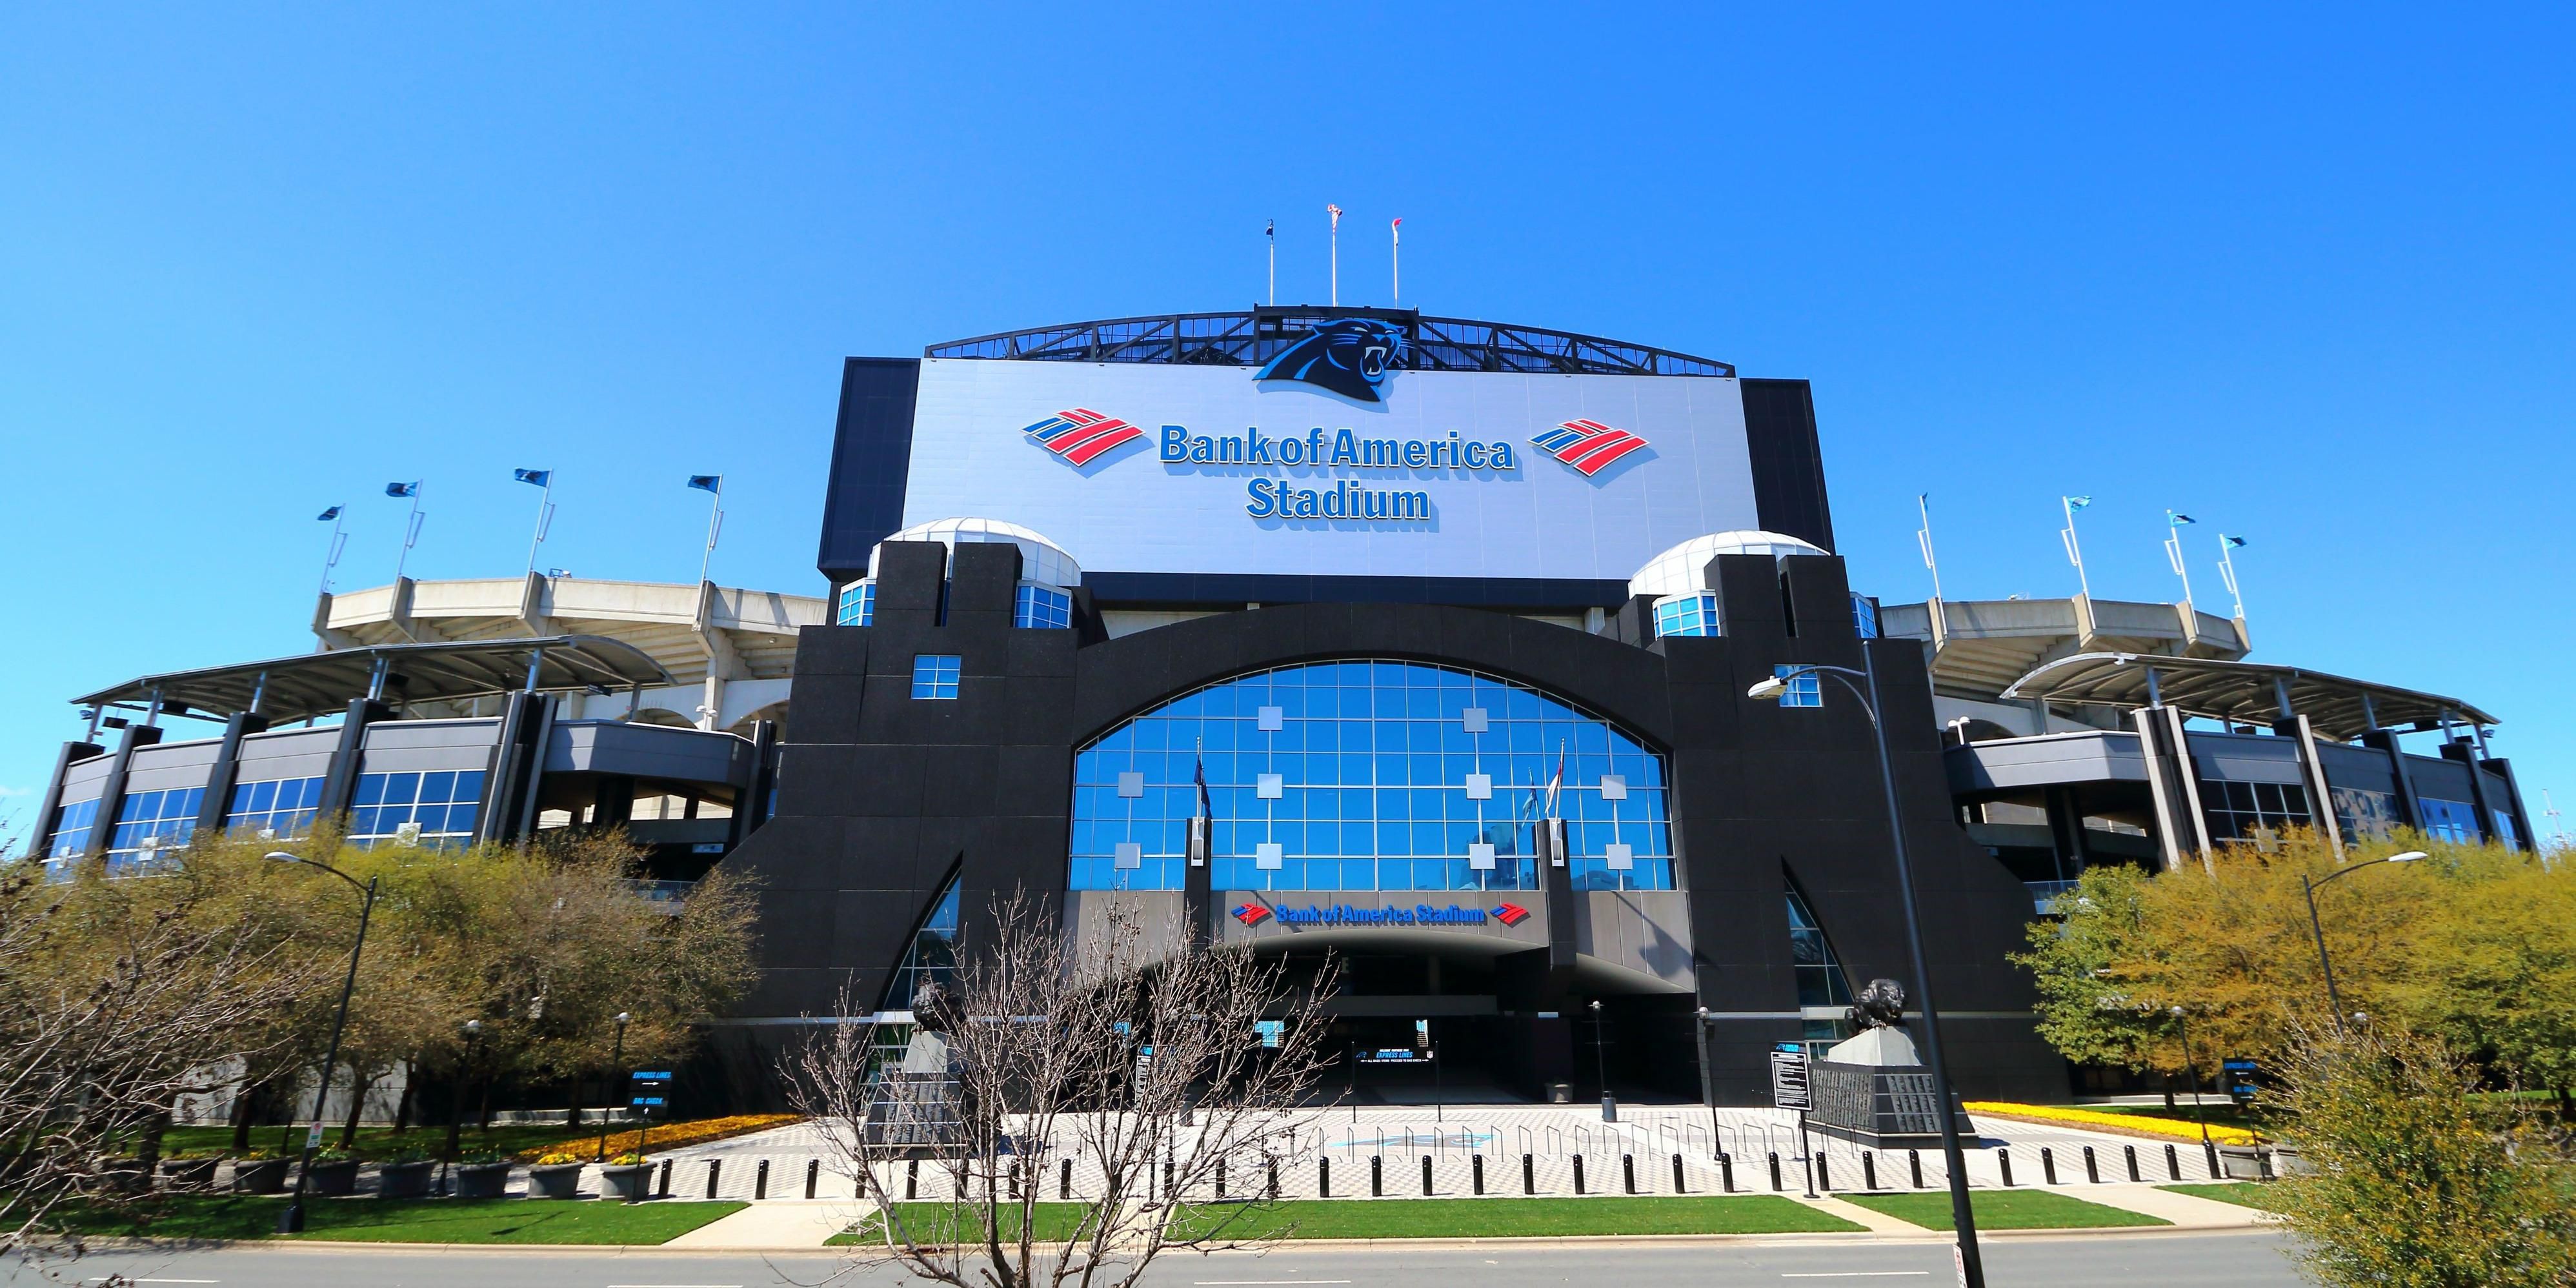 Come stay with us if you are planning to go the Bank of America Stadium to watch the NFL Carolina Panthers play, we are only 0.9 miles away, and don’t forget to check the team’s website for their upcoming schedule. 